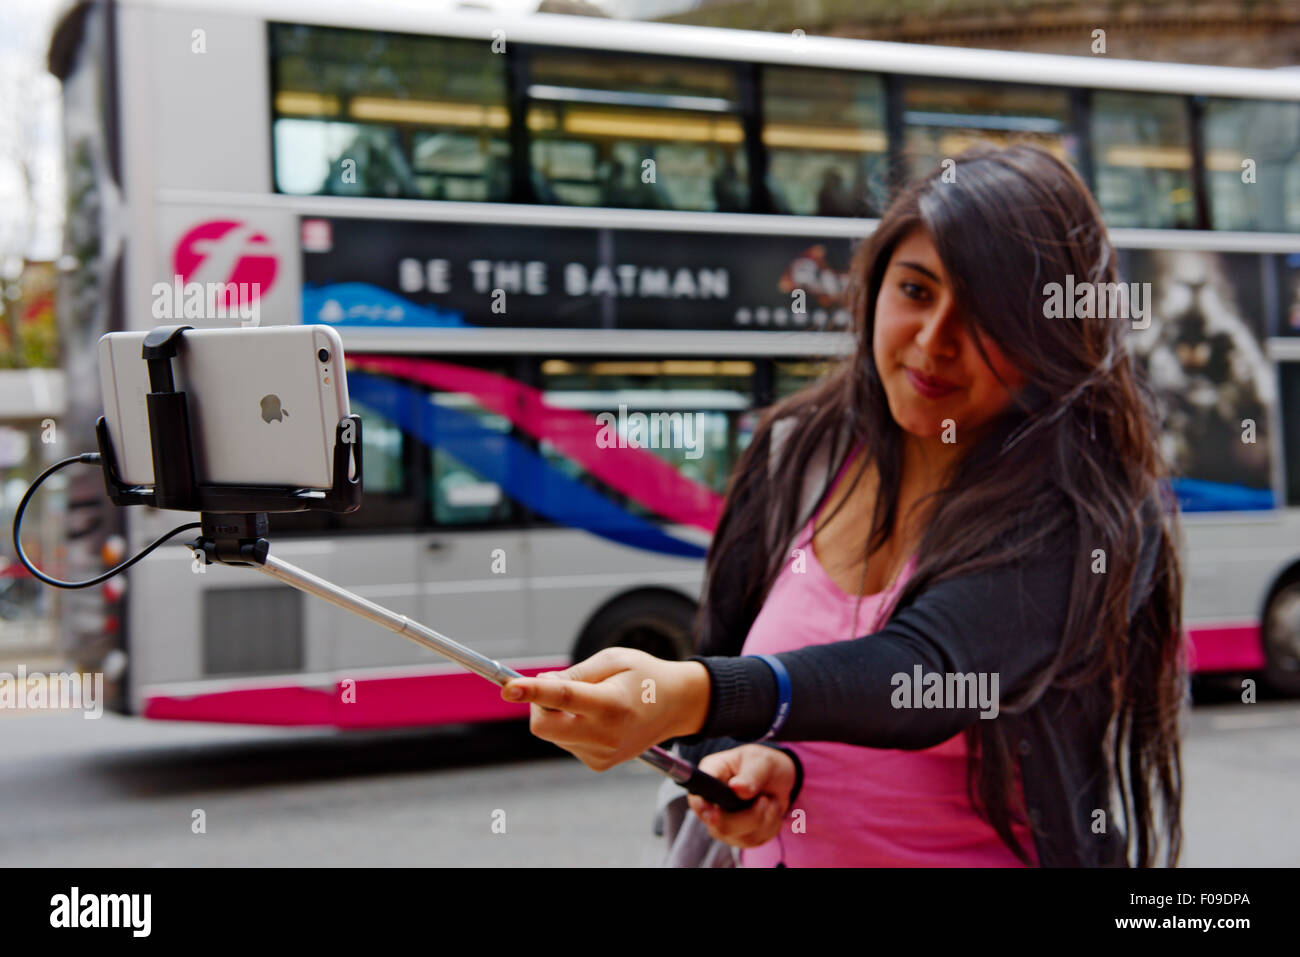 Apple iPhone held by selfie stick by out of focus young woman with double decker bus behind Stock Photo